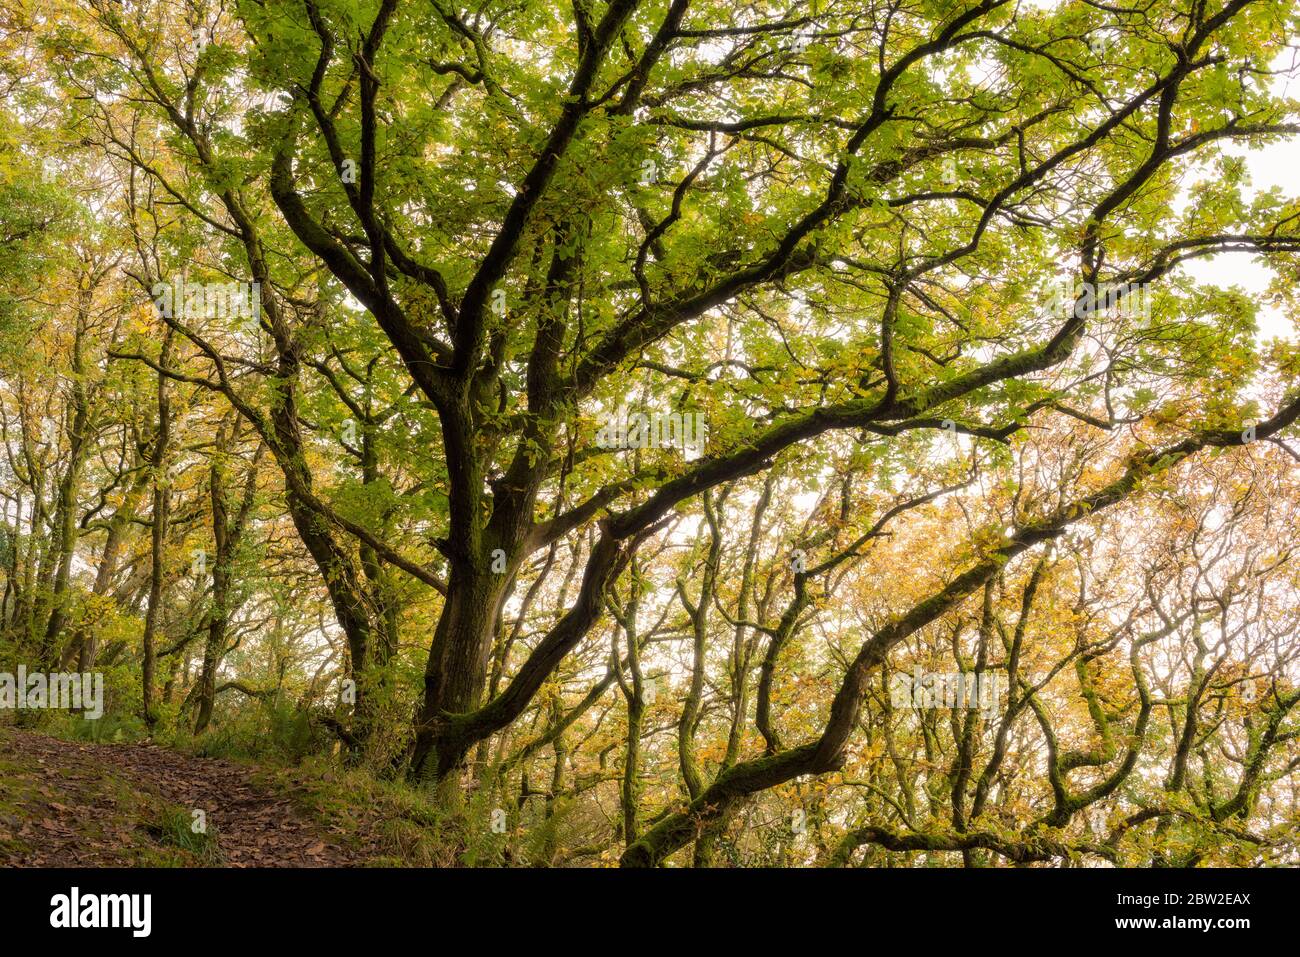 Yearnor Wood along the South West Coast Path in autumn in the Exmoor National Park, Somerset, England. Stock Photo